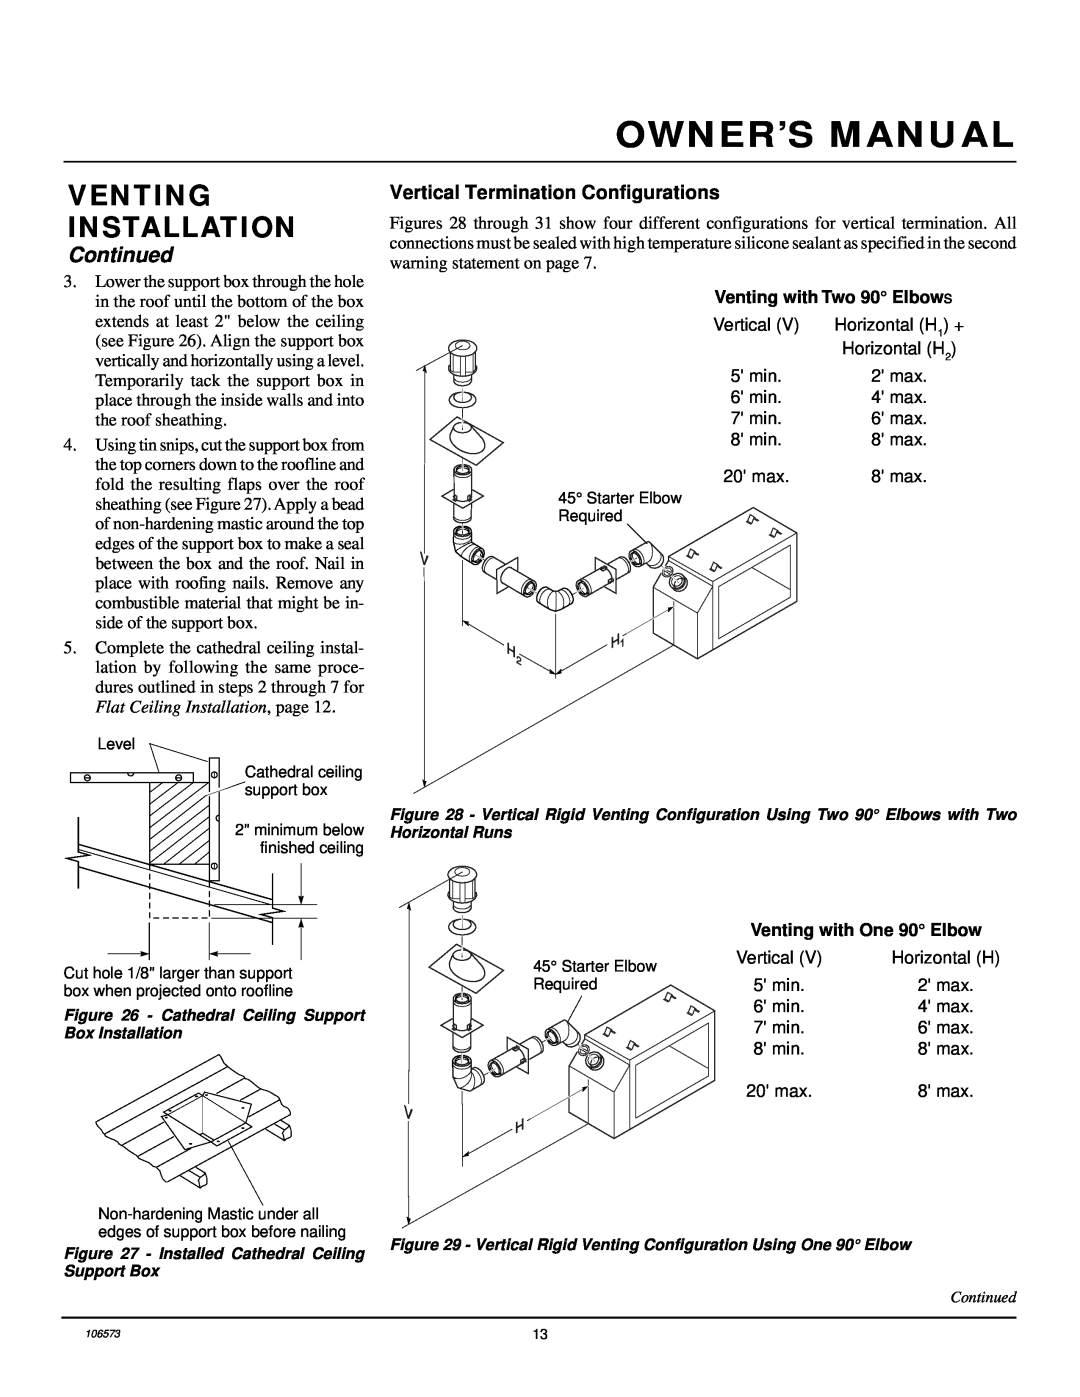 Desa EVDDVF36STN, EVDDVF36PN Vertical Termination Configurations, Owner’S Manual, Venting Installation, Continued 